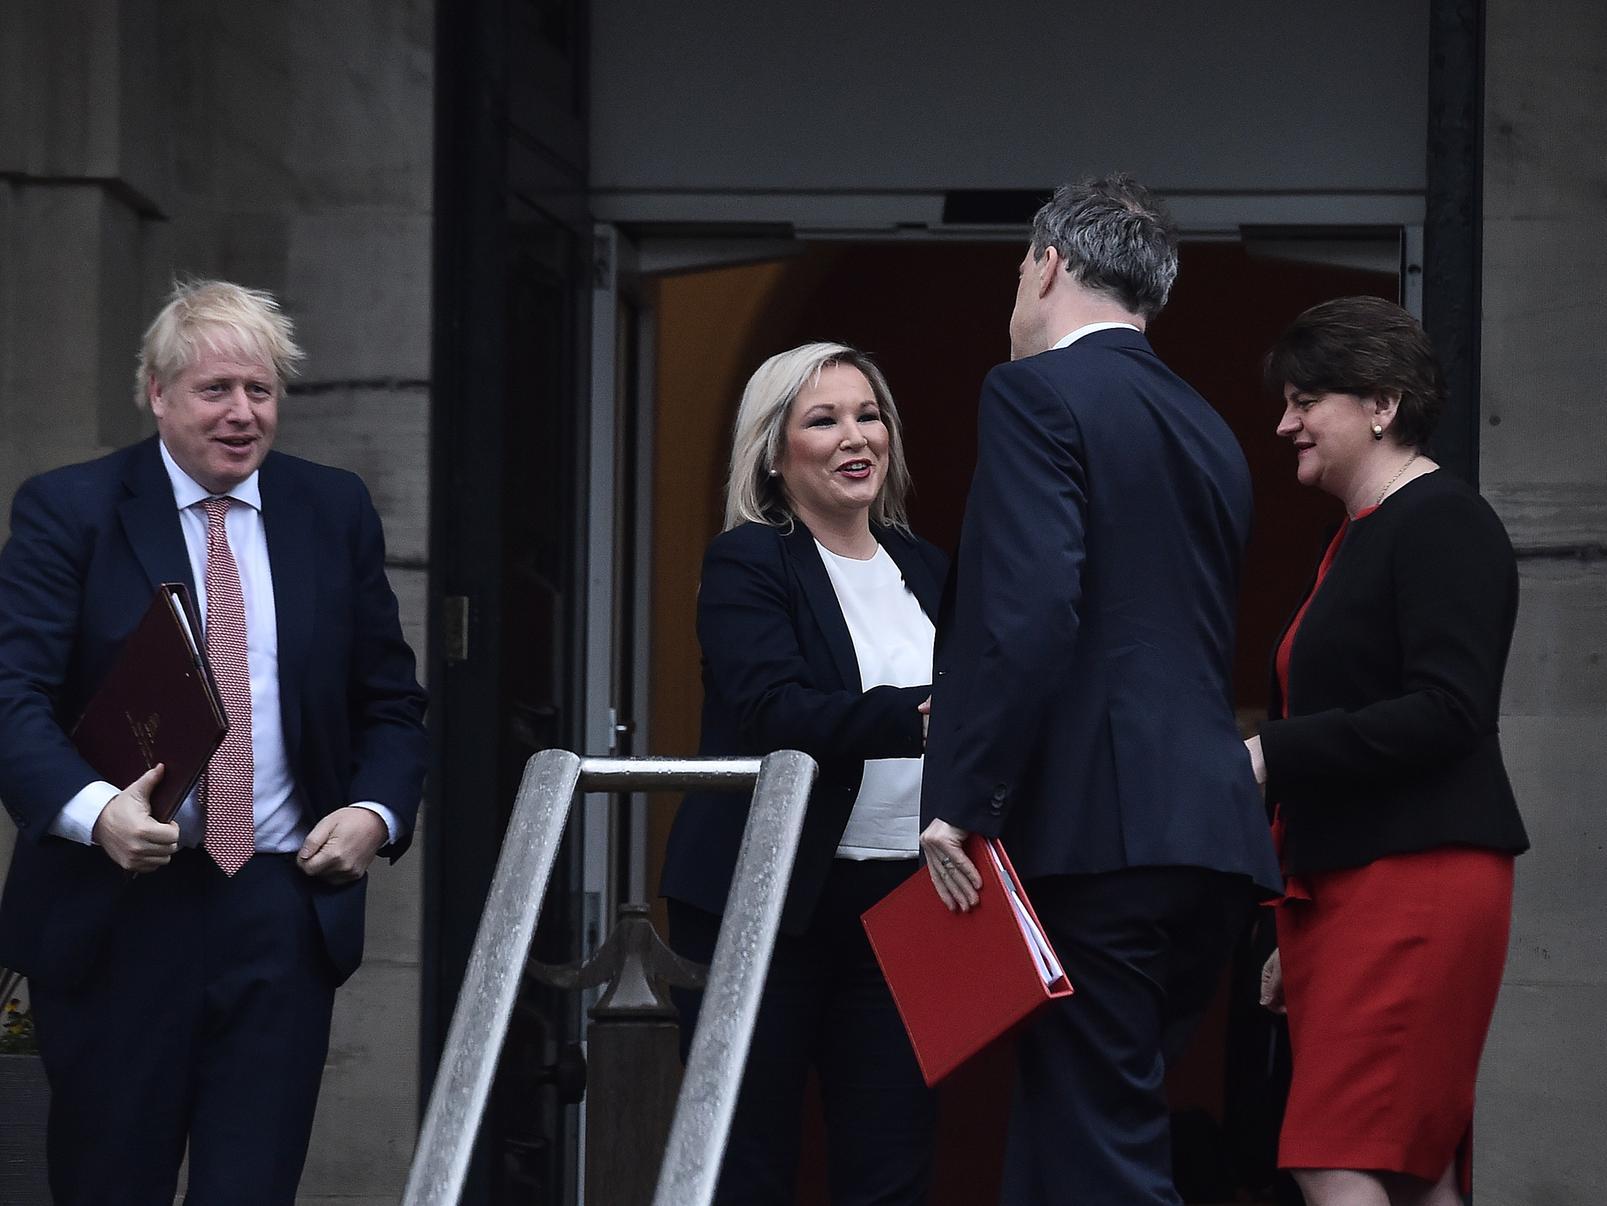 Prime Minister Boris Johnson and Secretary of State for Northern Ireland, Julian Smith, First Minister, Arlene Foster and deputy First Minister Michelle O'Neill